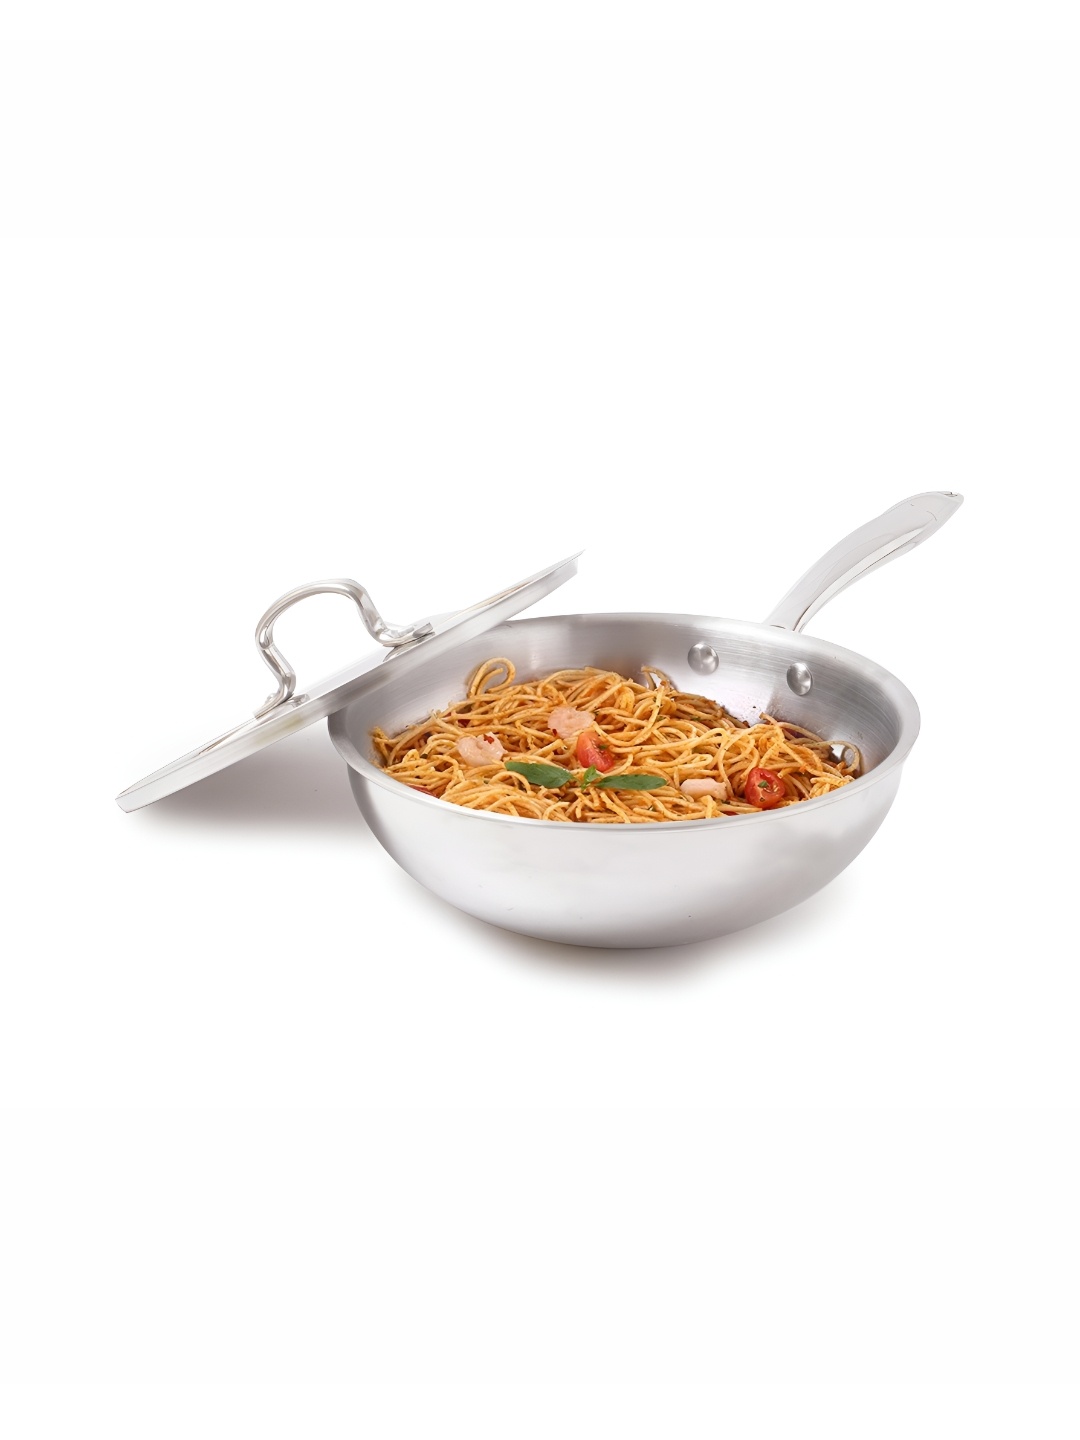 

The Indus Valley Silver-Toned Tri-Ply Stainless Steel Induction Base Kadhai or Wok